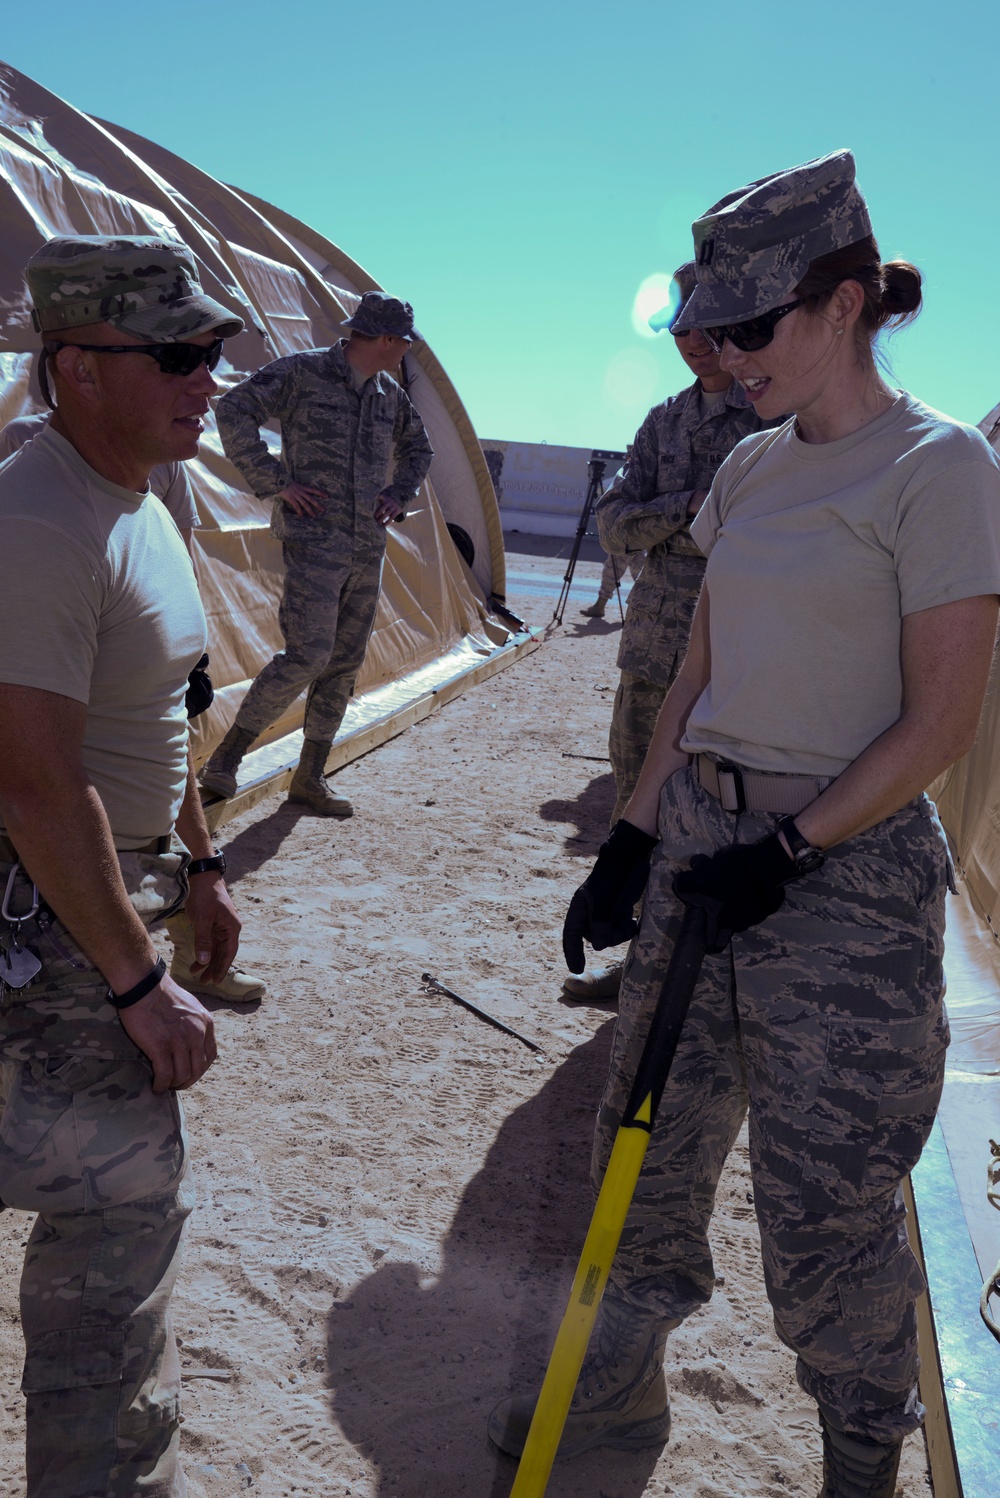 386th Expeditionary Medical Group sets up expeditionary medical support site